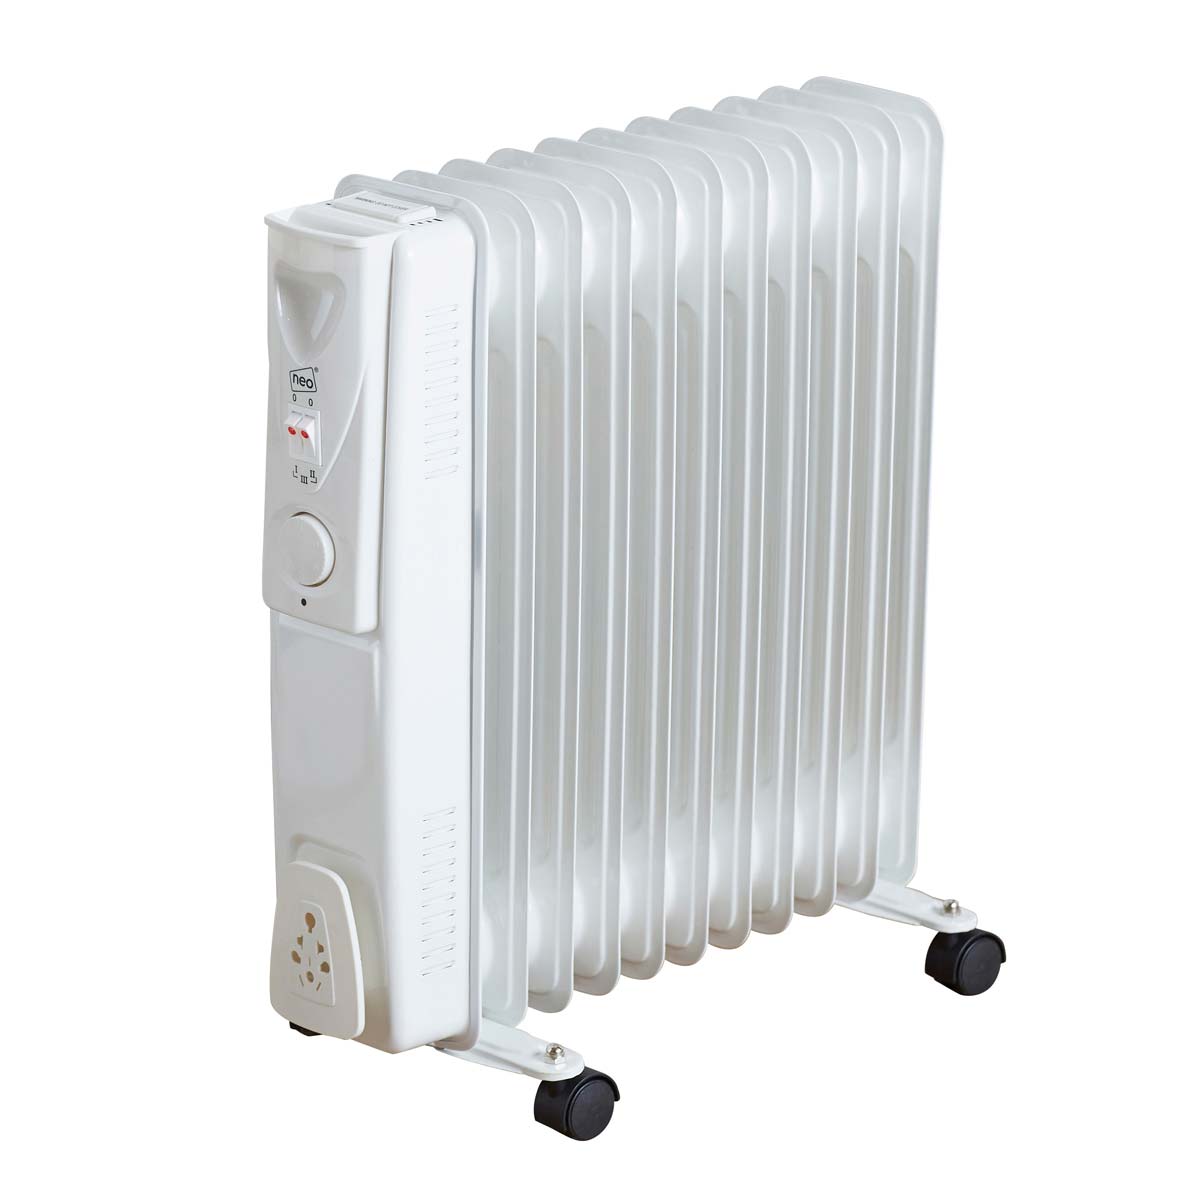 Neo Direct Neo 11 Fin White Electric Oil Filled Radiator